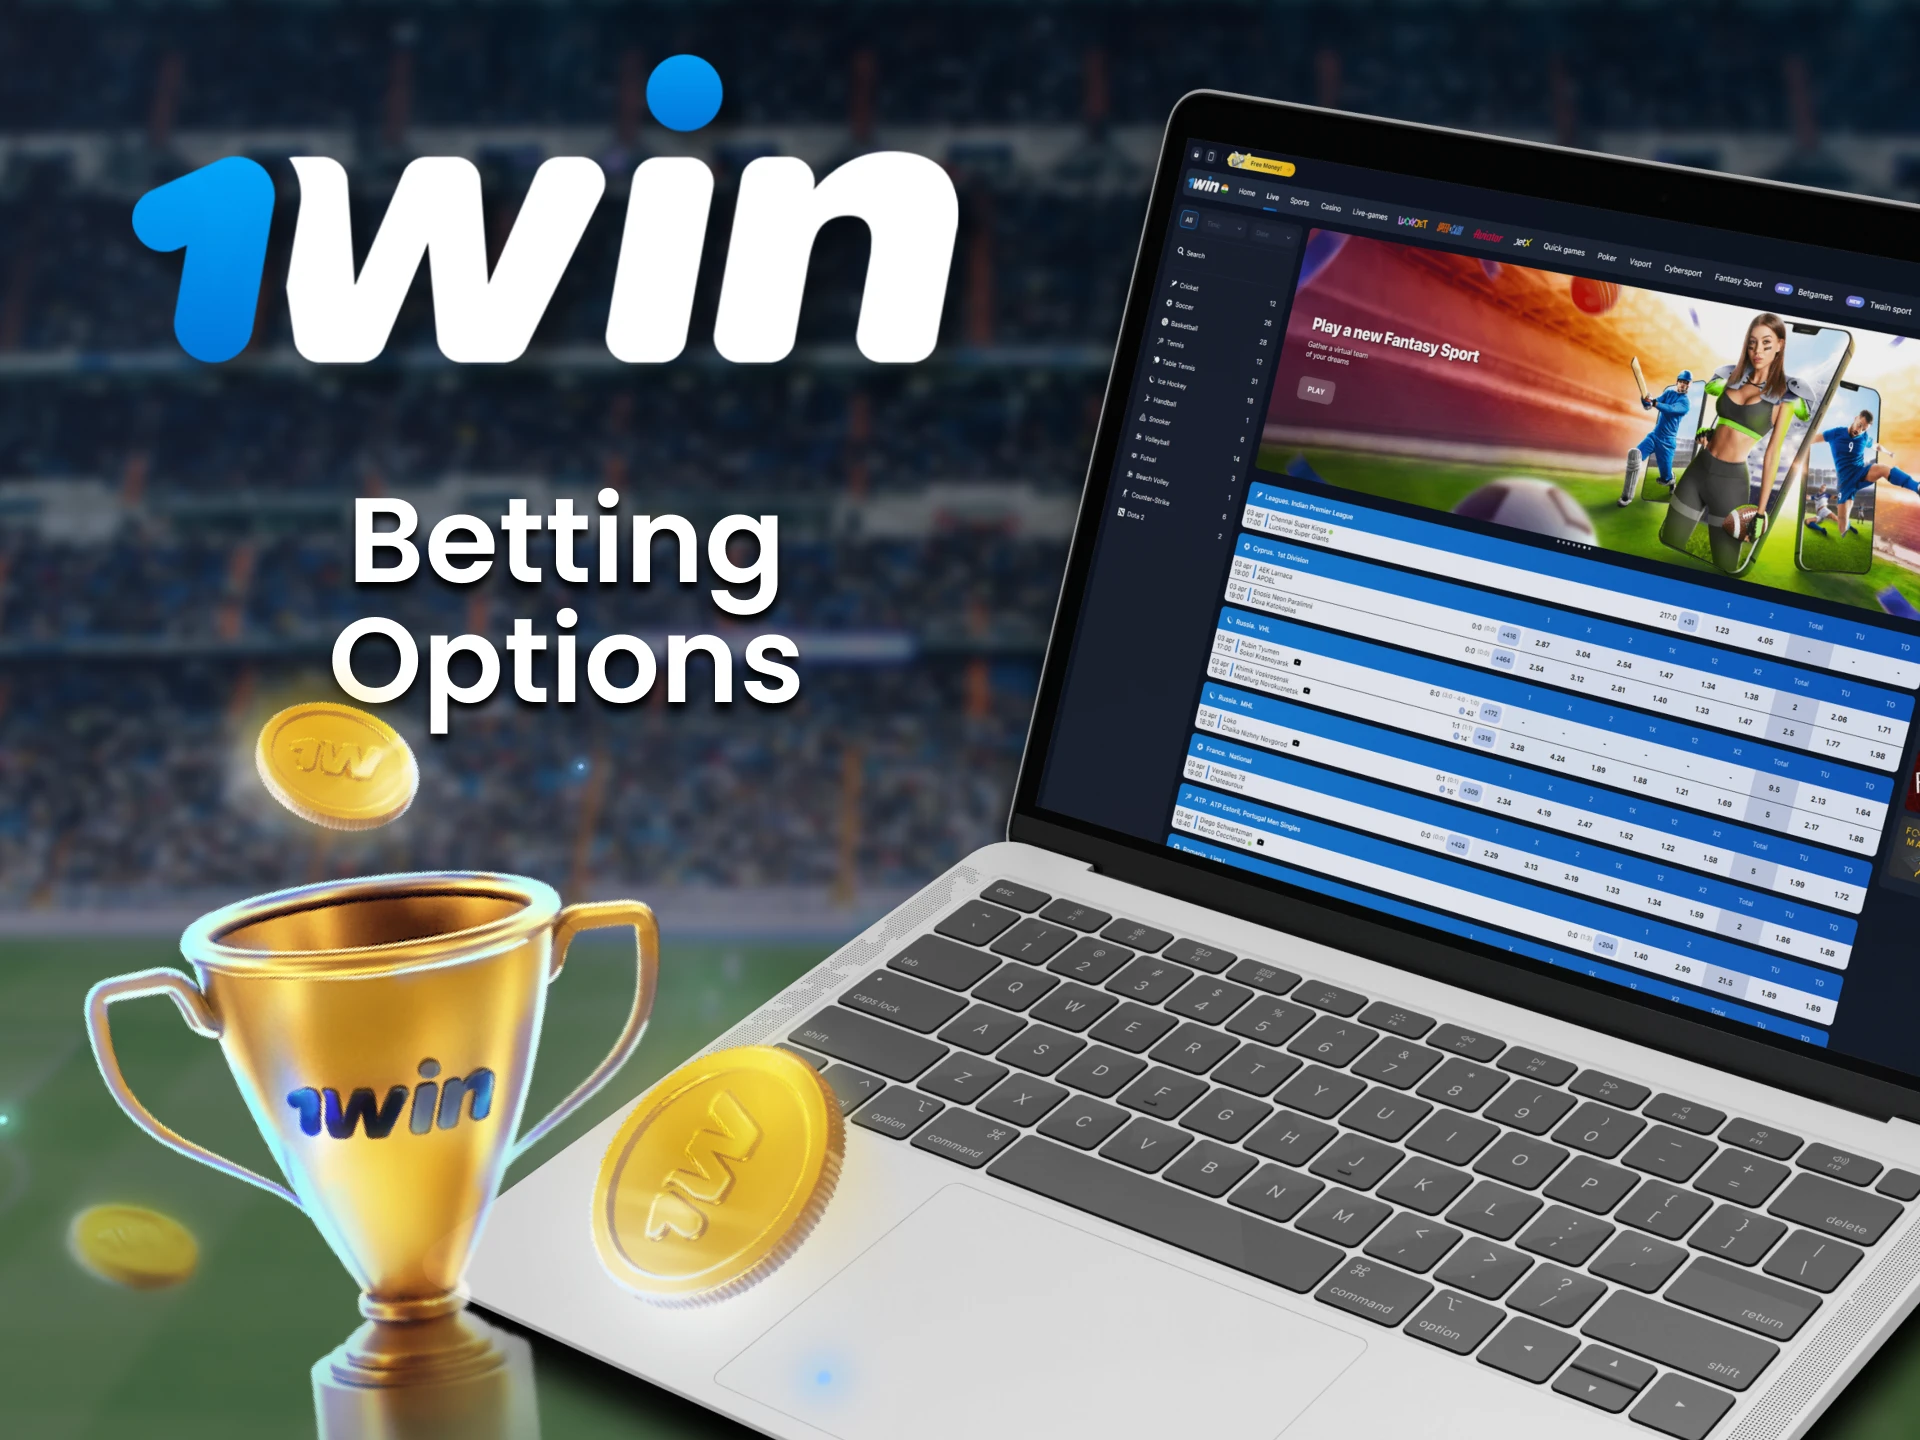 Learn about the different betting options at 1win.